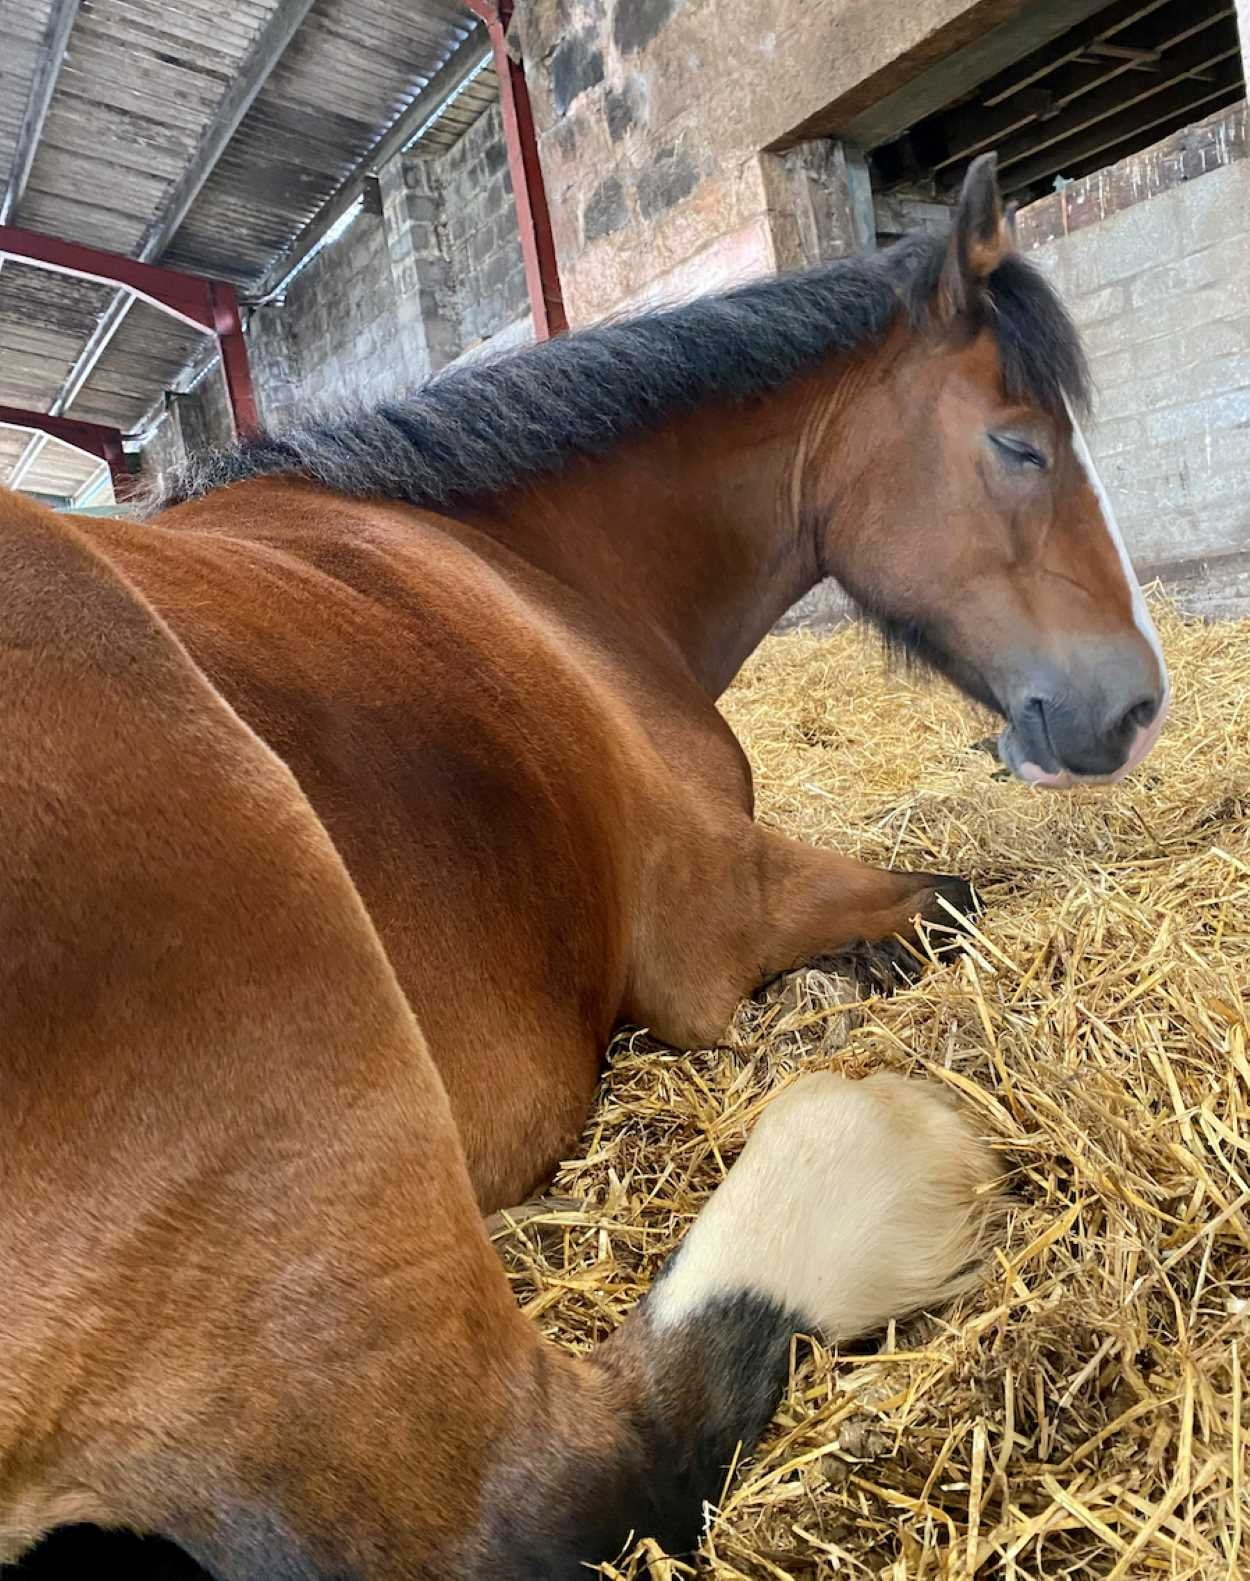 A bay clydesdale cross welsh horse having a snooze in a straw bed